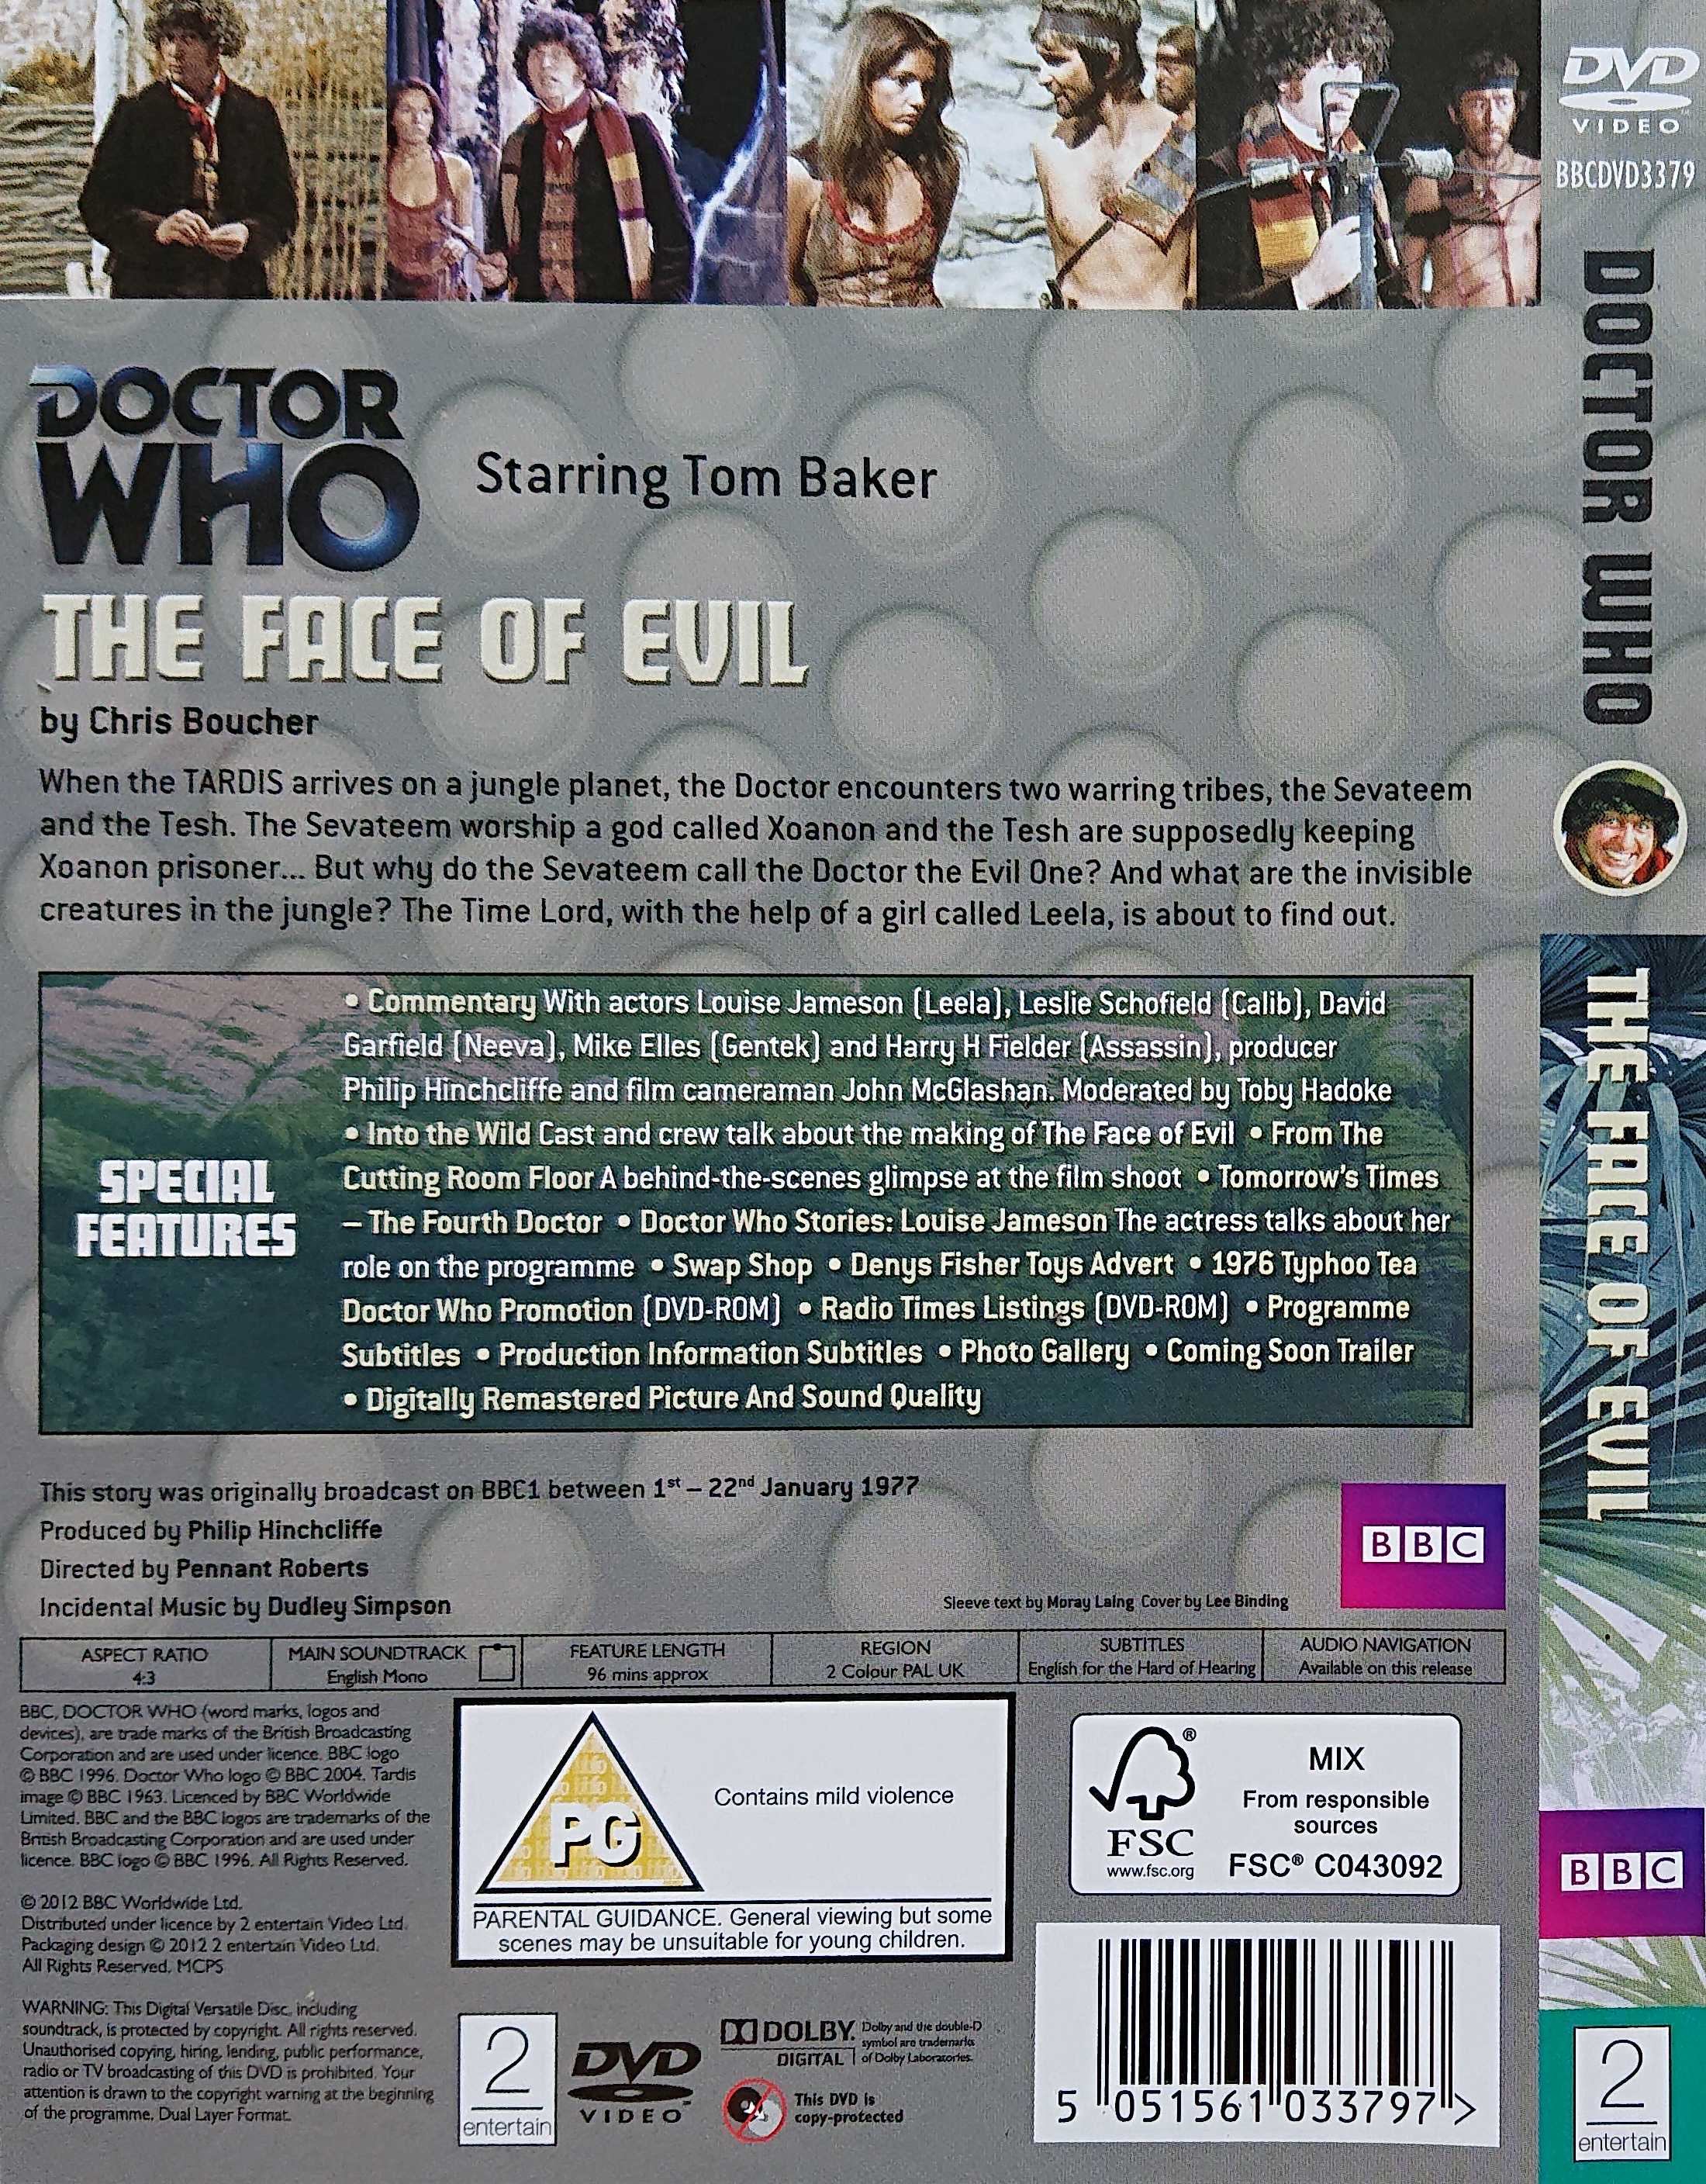 Picture of BBCDVD 3379 Doctor Who - The face of evil by artist Chris Boucher from the BBC records and Tapes library